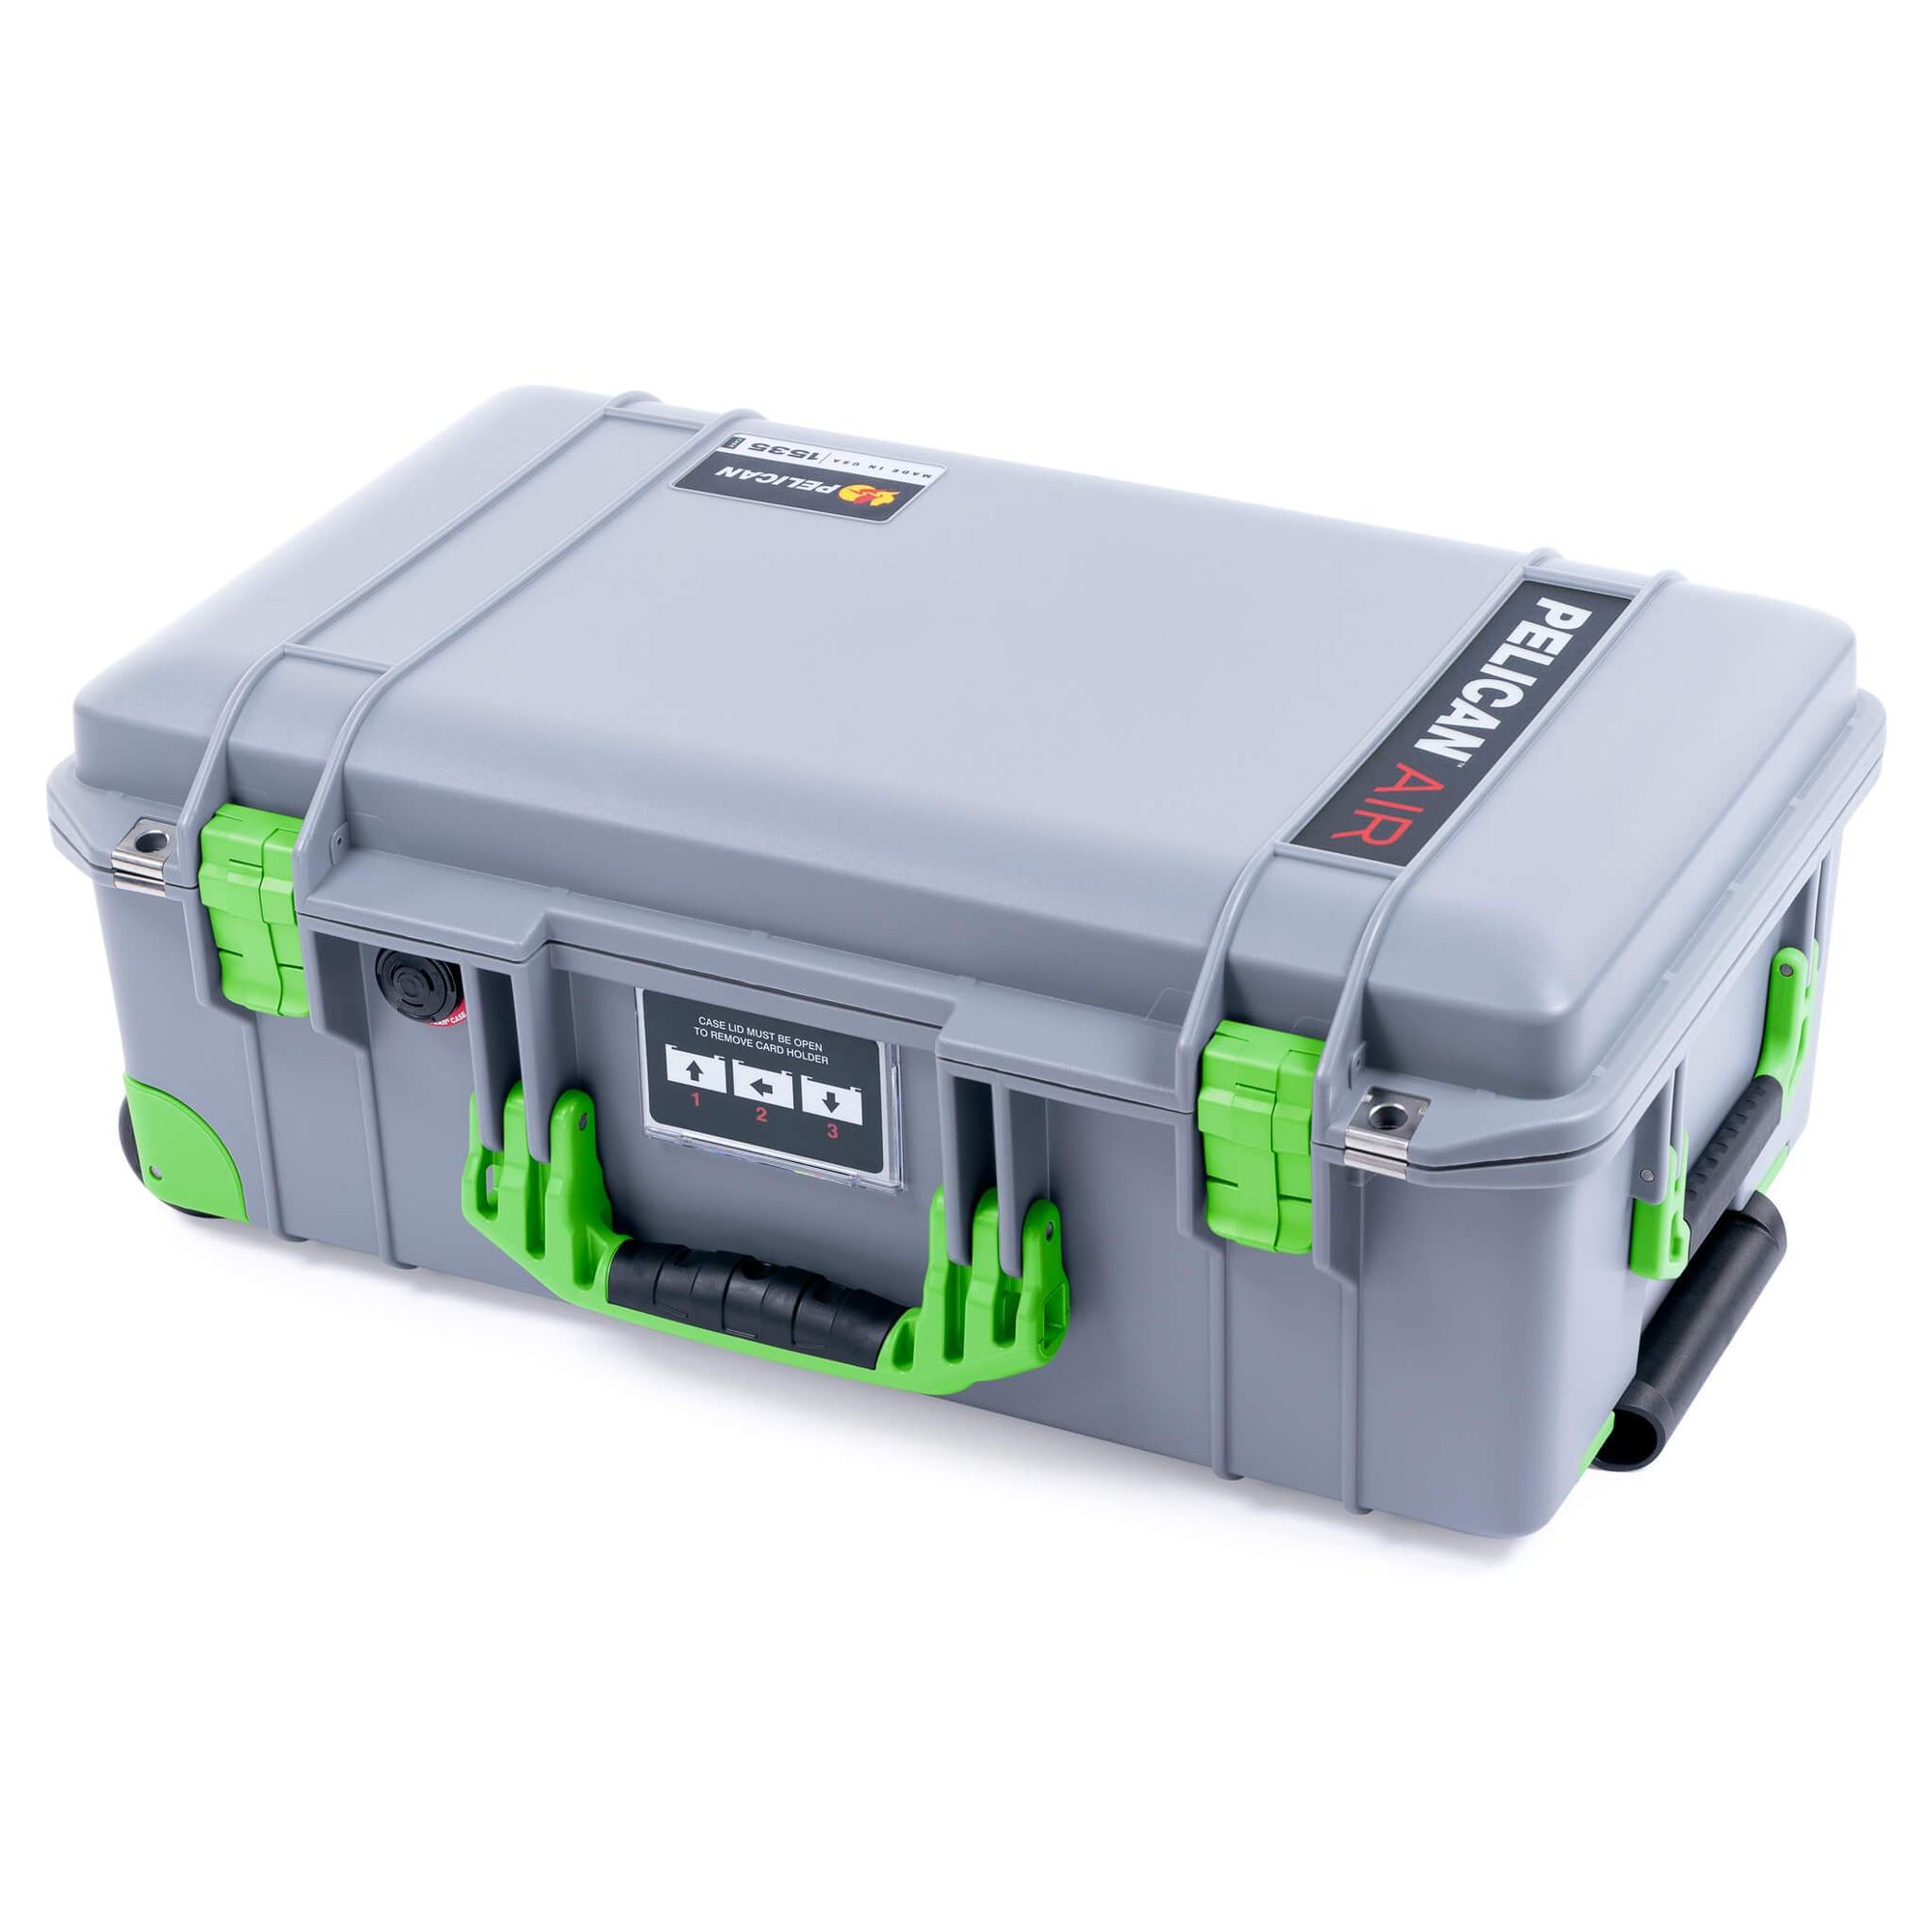 Pelican 1535 Air Case, Silver with Lime Green Handles, Latches & Trolley ColorCase 